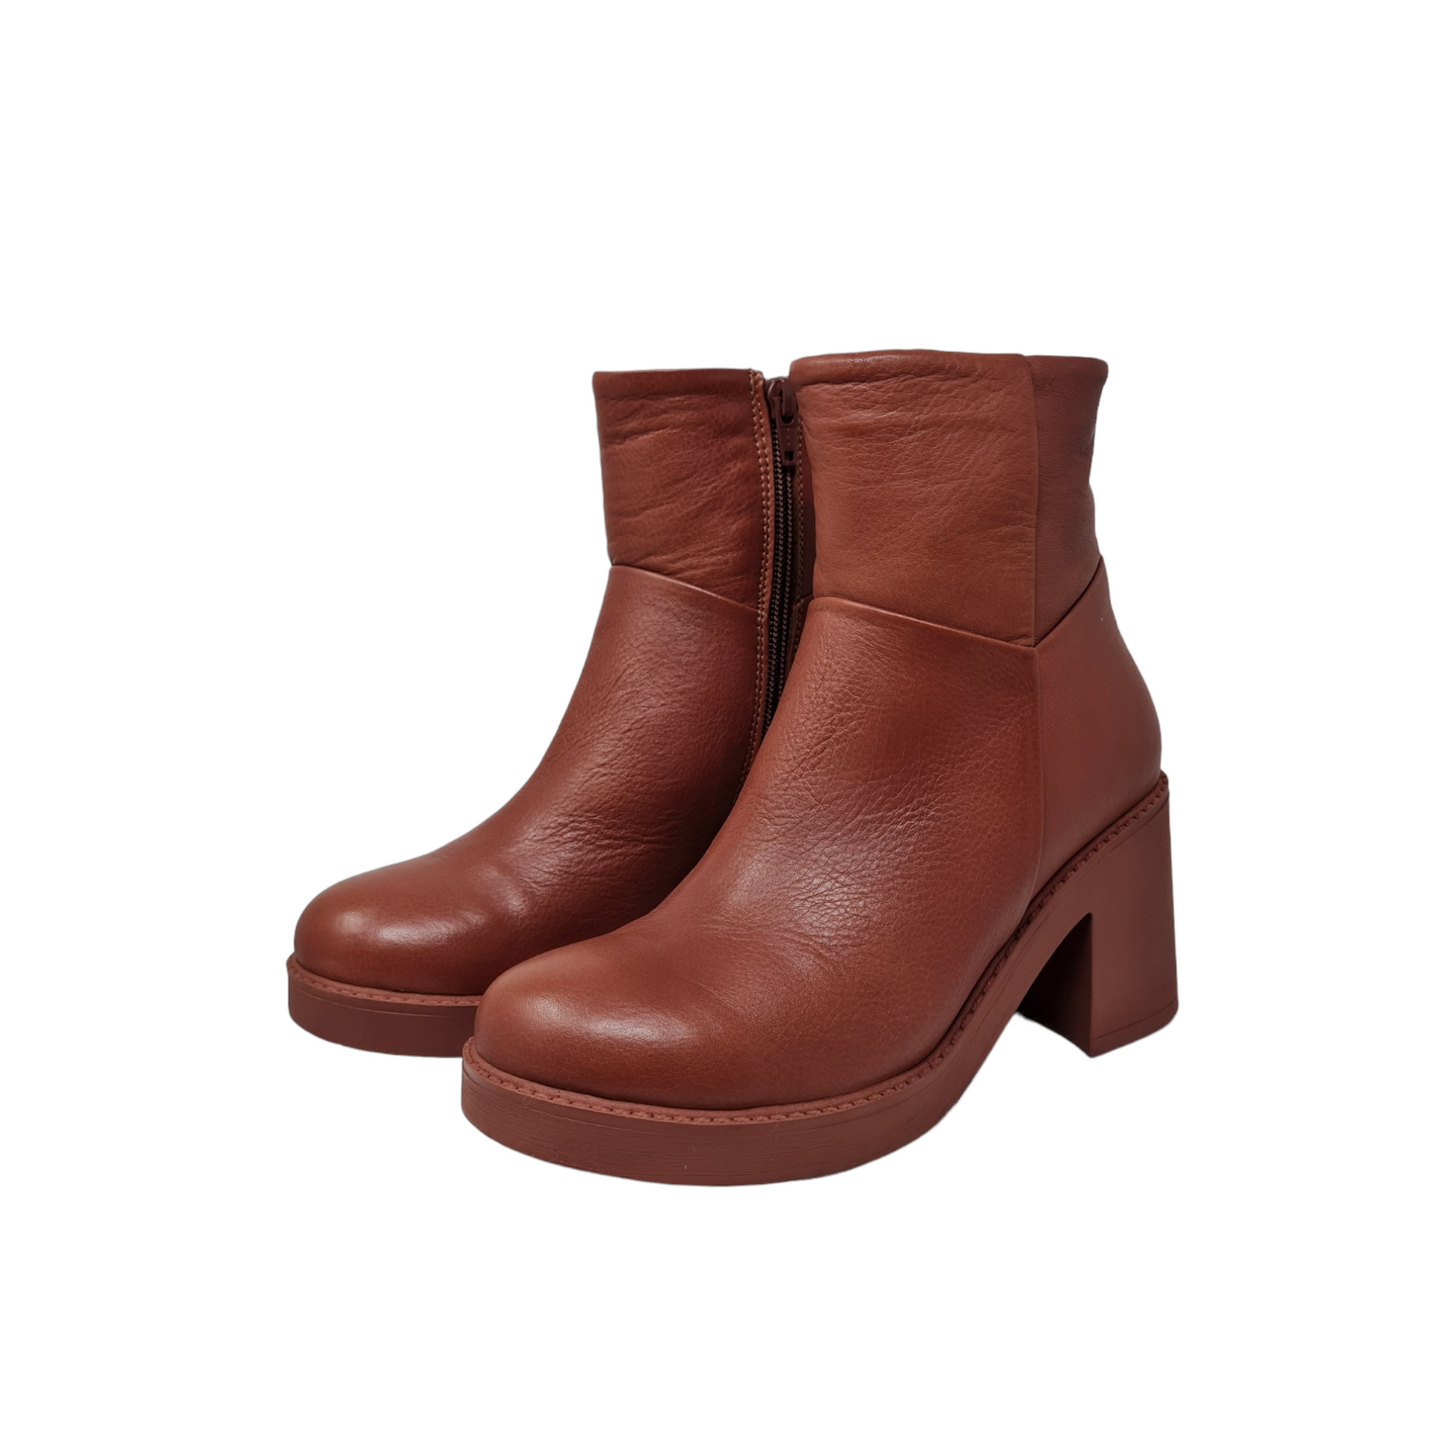 Z7100 ankle boot